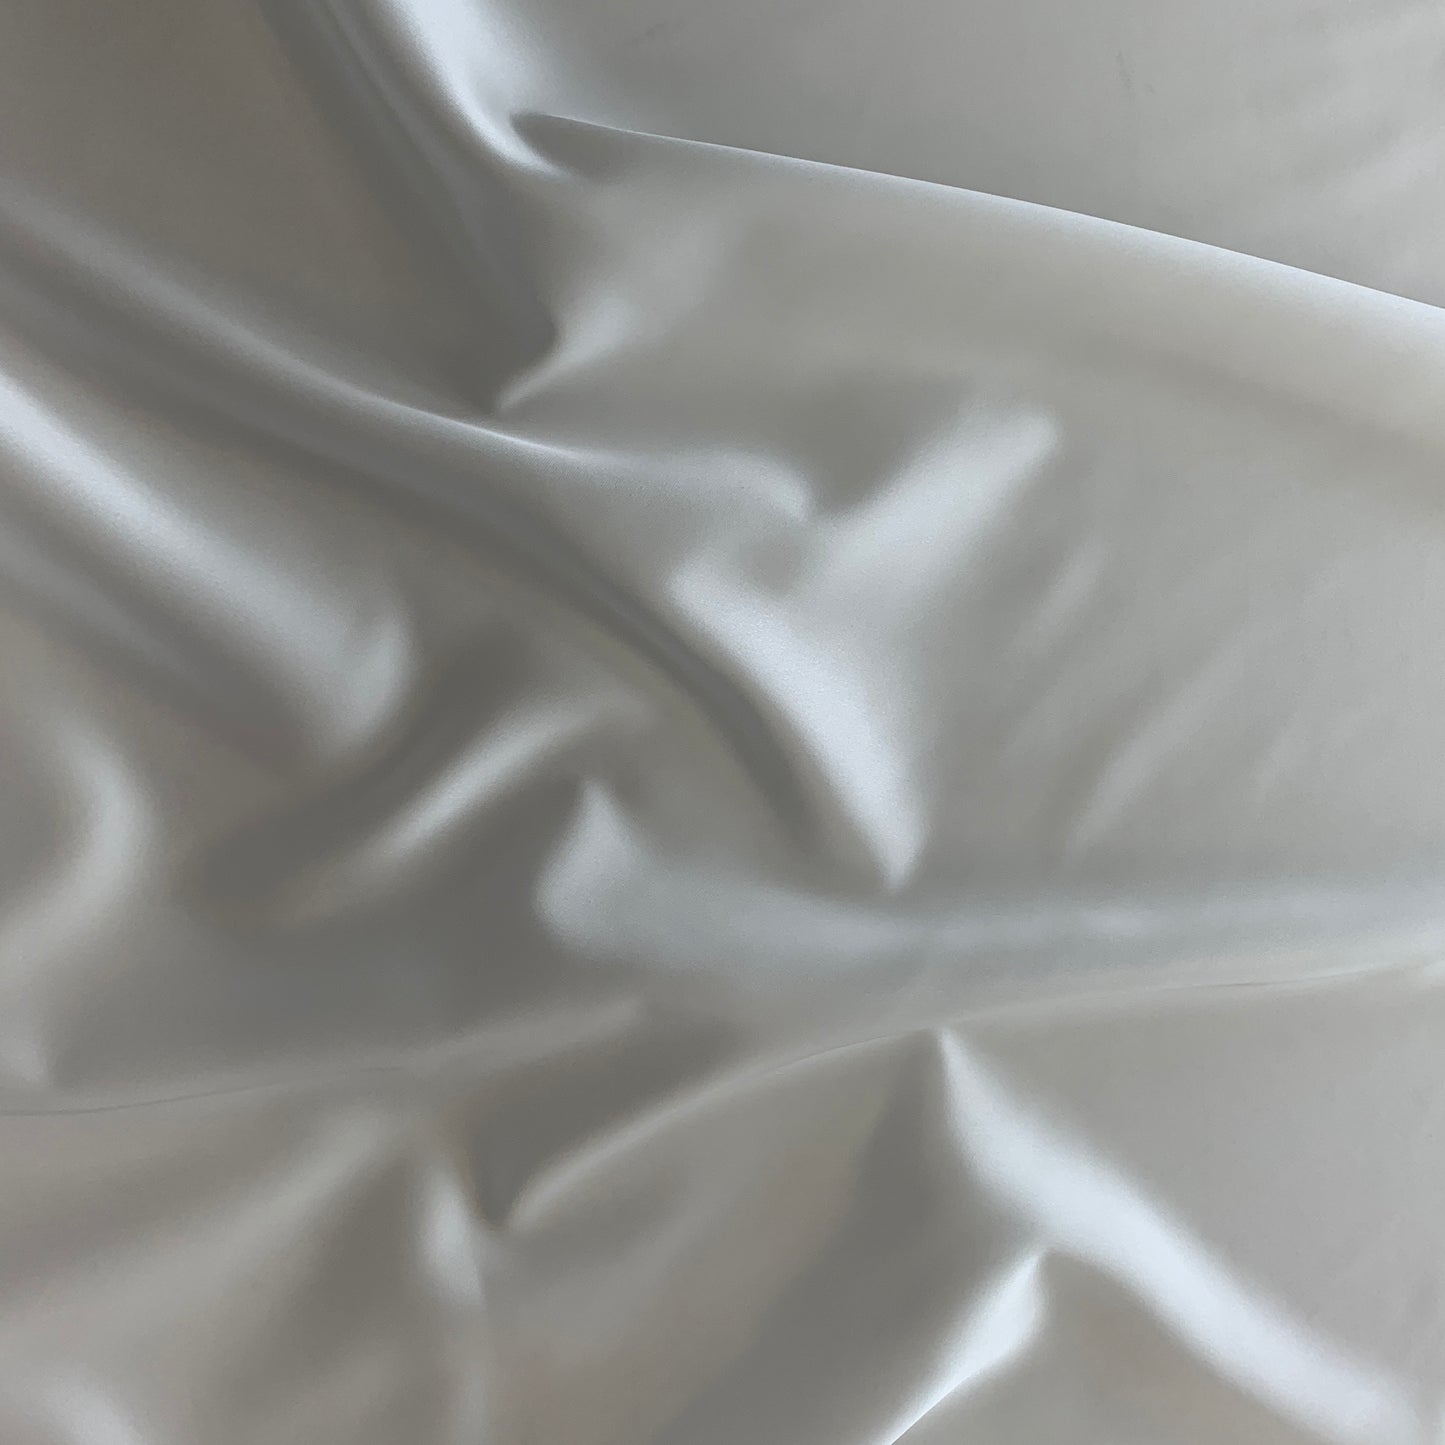 Featuring Stella heavy stretch satin a ivory colored polyester Microfiber and Spandex blended fabric